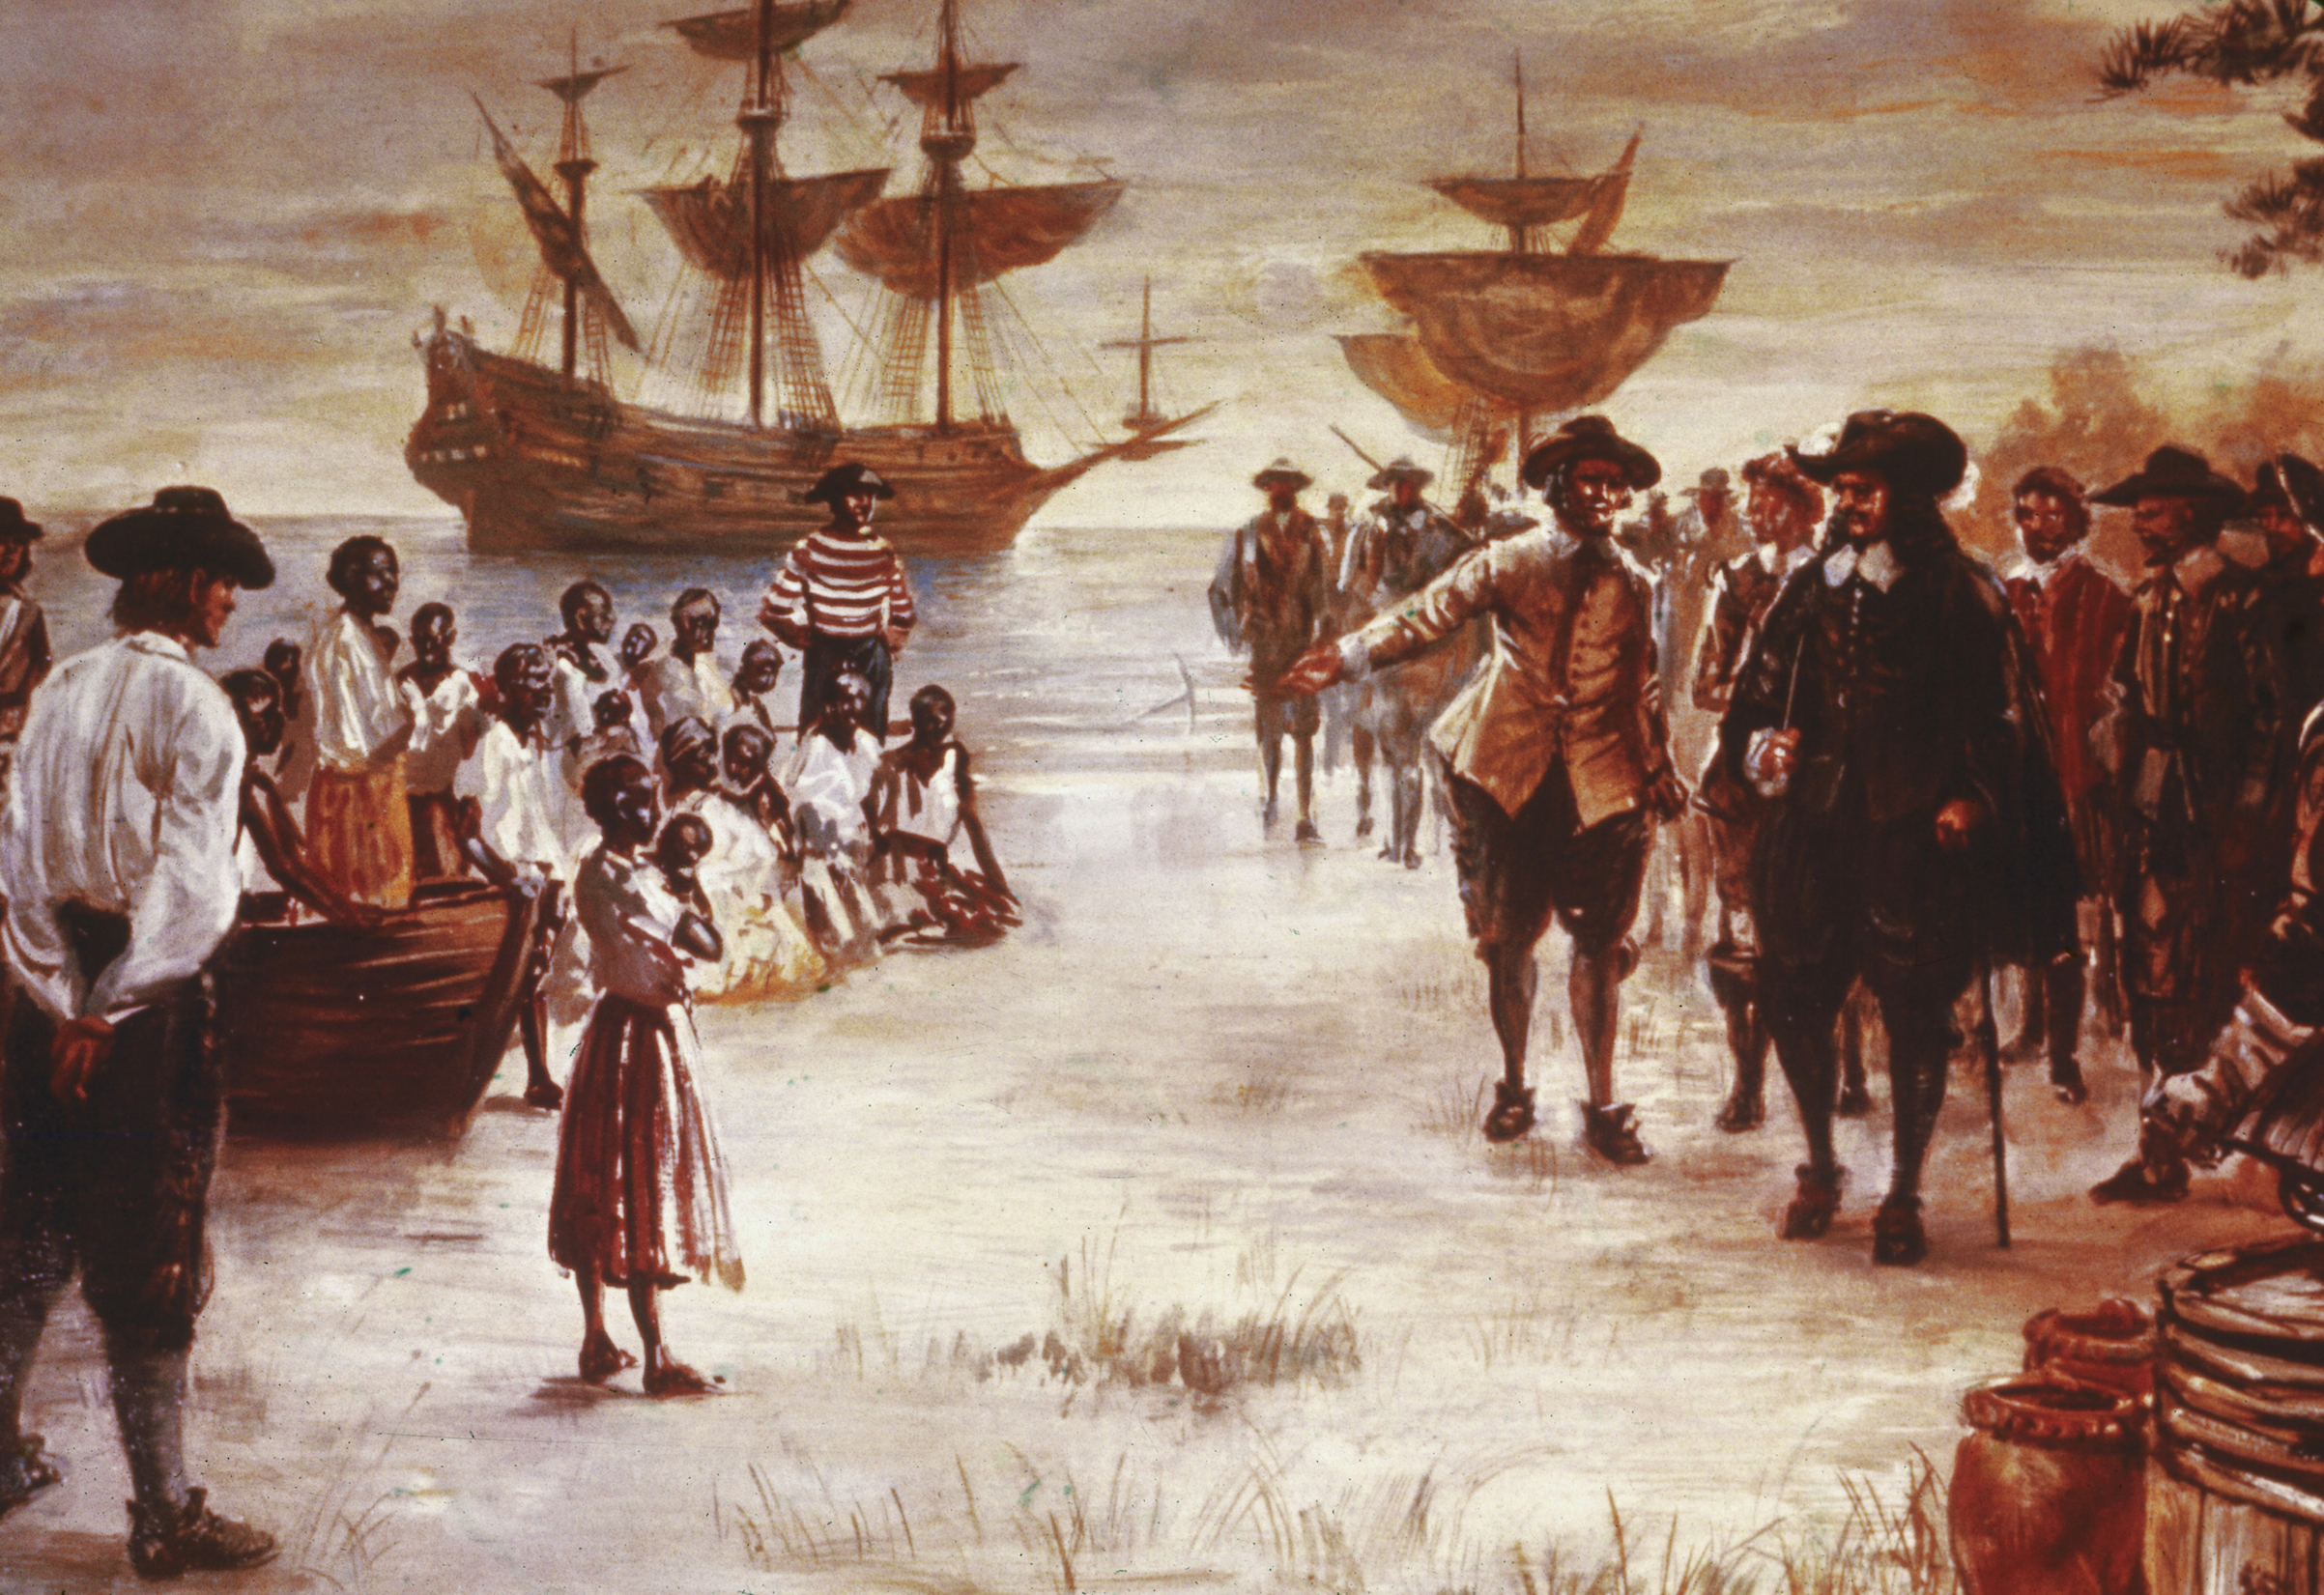 Engraving shows the arrival of a ship with a group of Africans for sale in Virginia in 1619 (Hulton Archive/Getty Images)